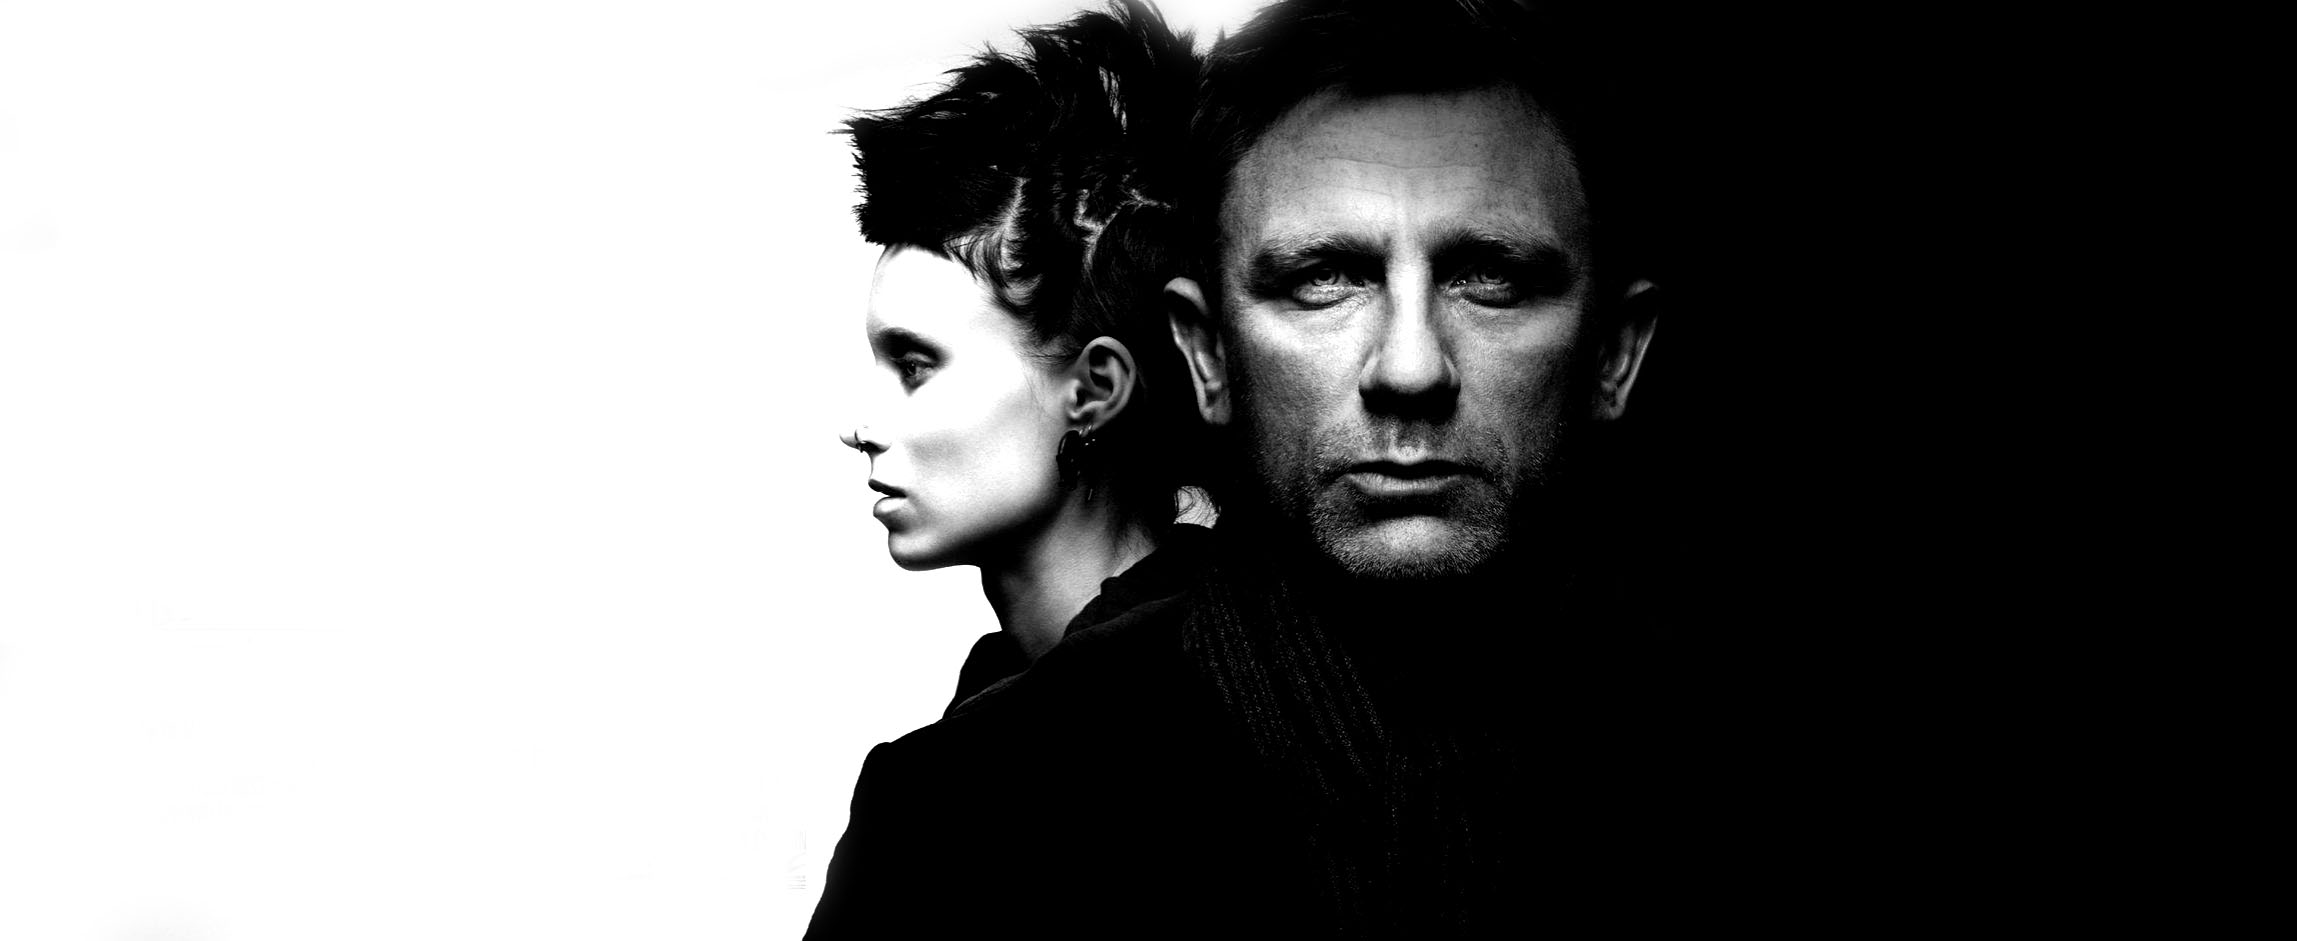 genre of the girl with the dragon tattoo